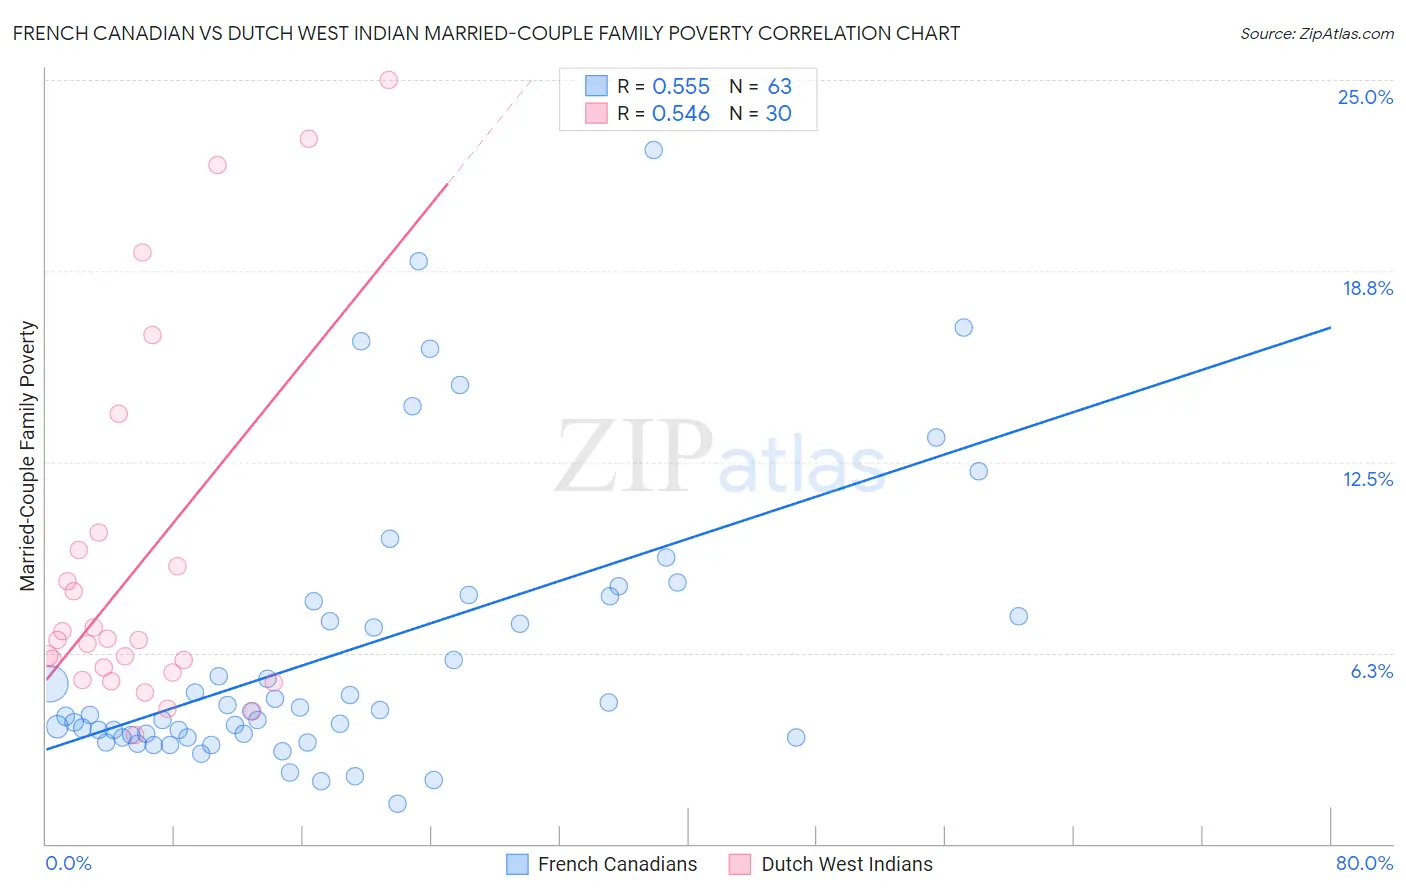 French Canadian vs Dutch West Indian Married-Couple Family Poverty